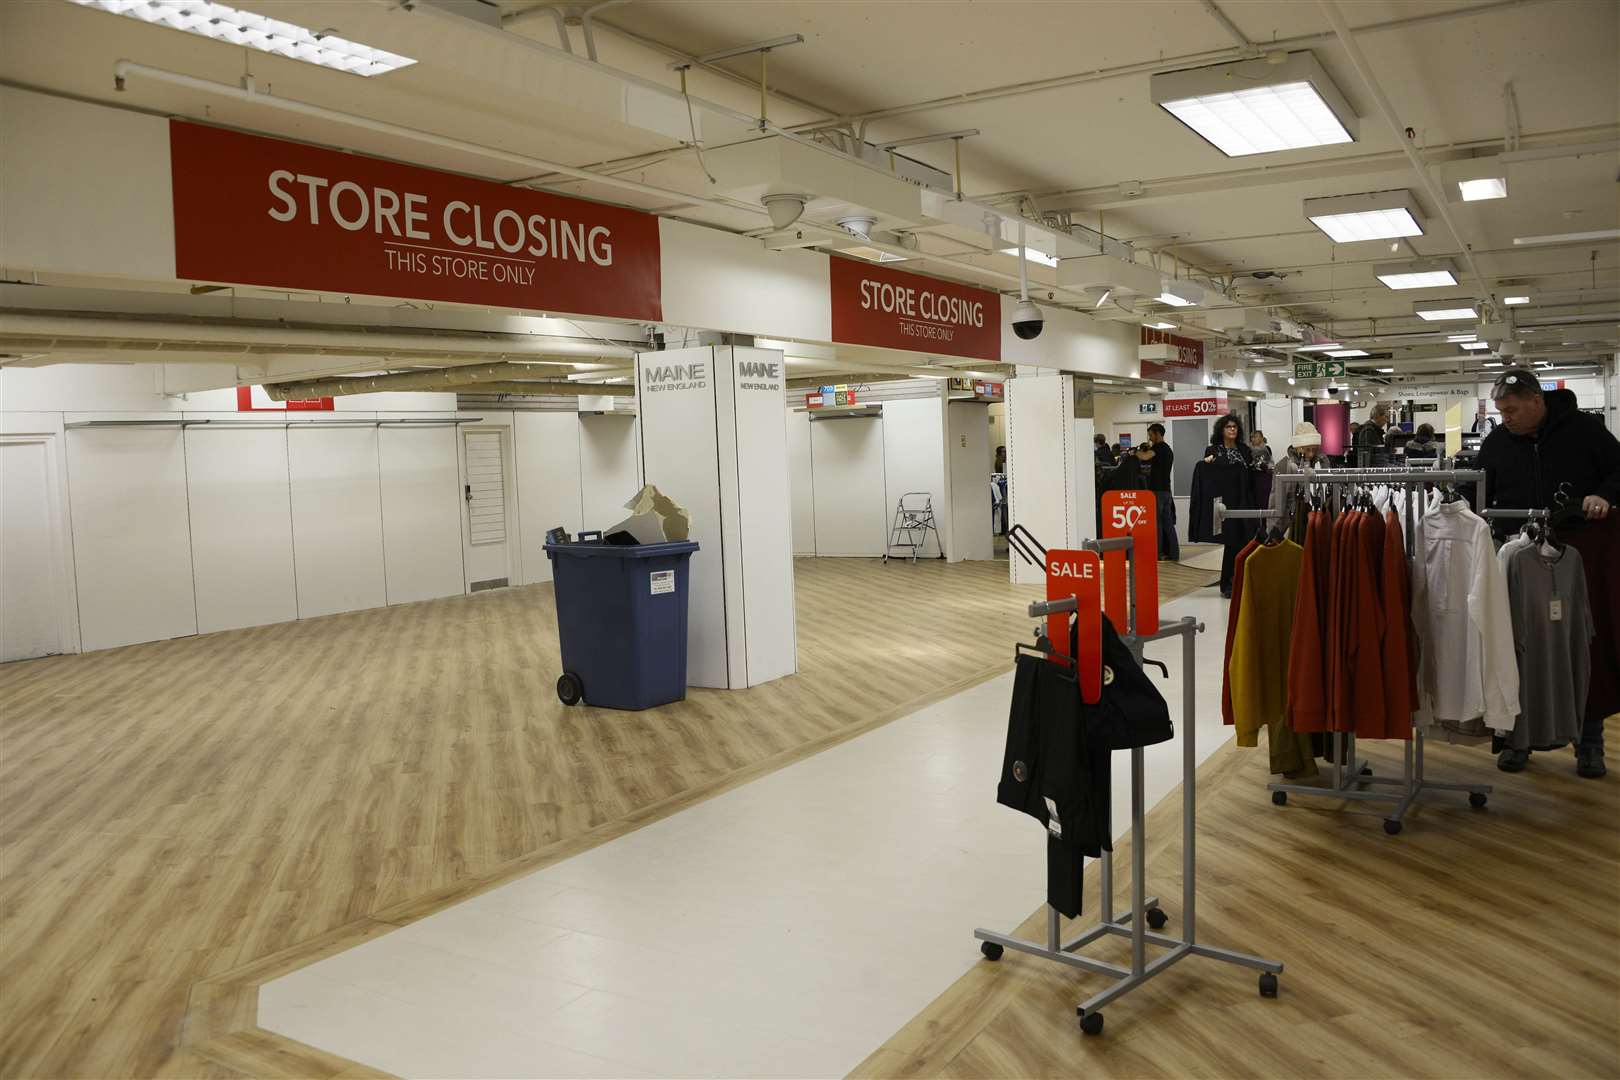 Images reveal huge vacant spaces within the store on Saturday. Picture: Paul Amos